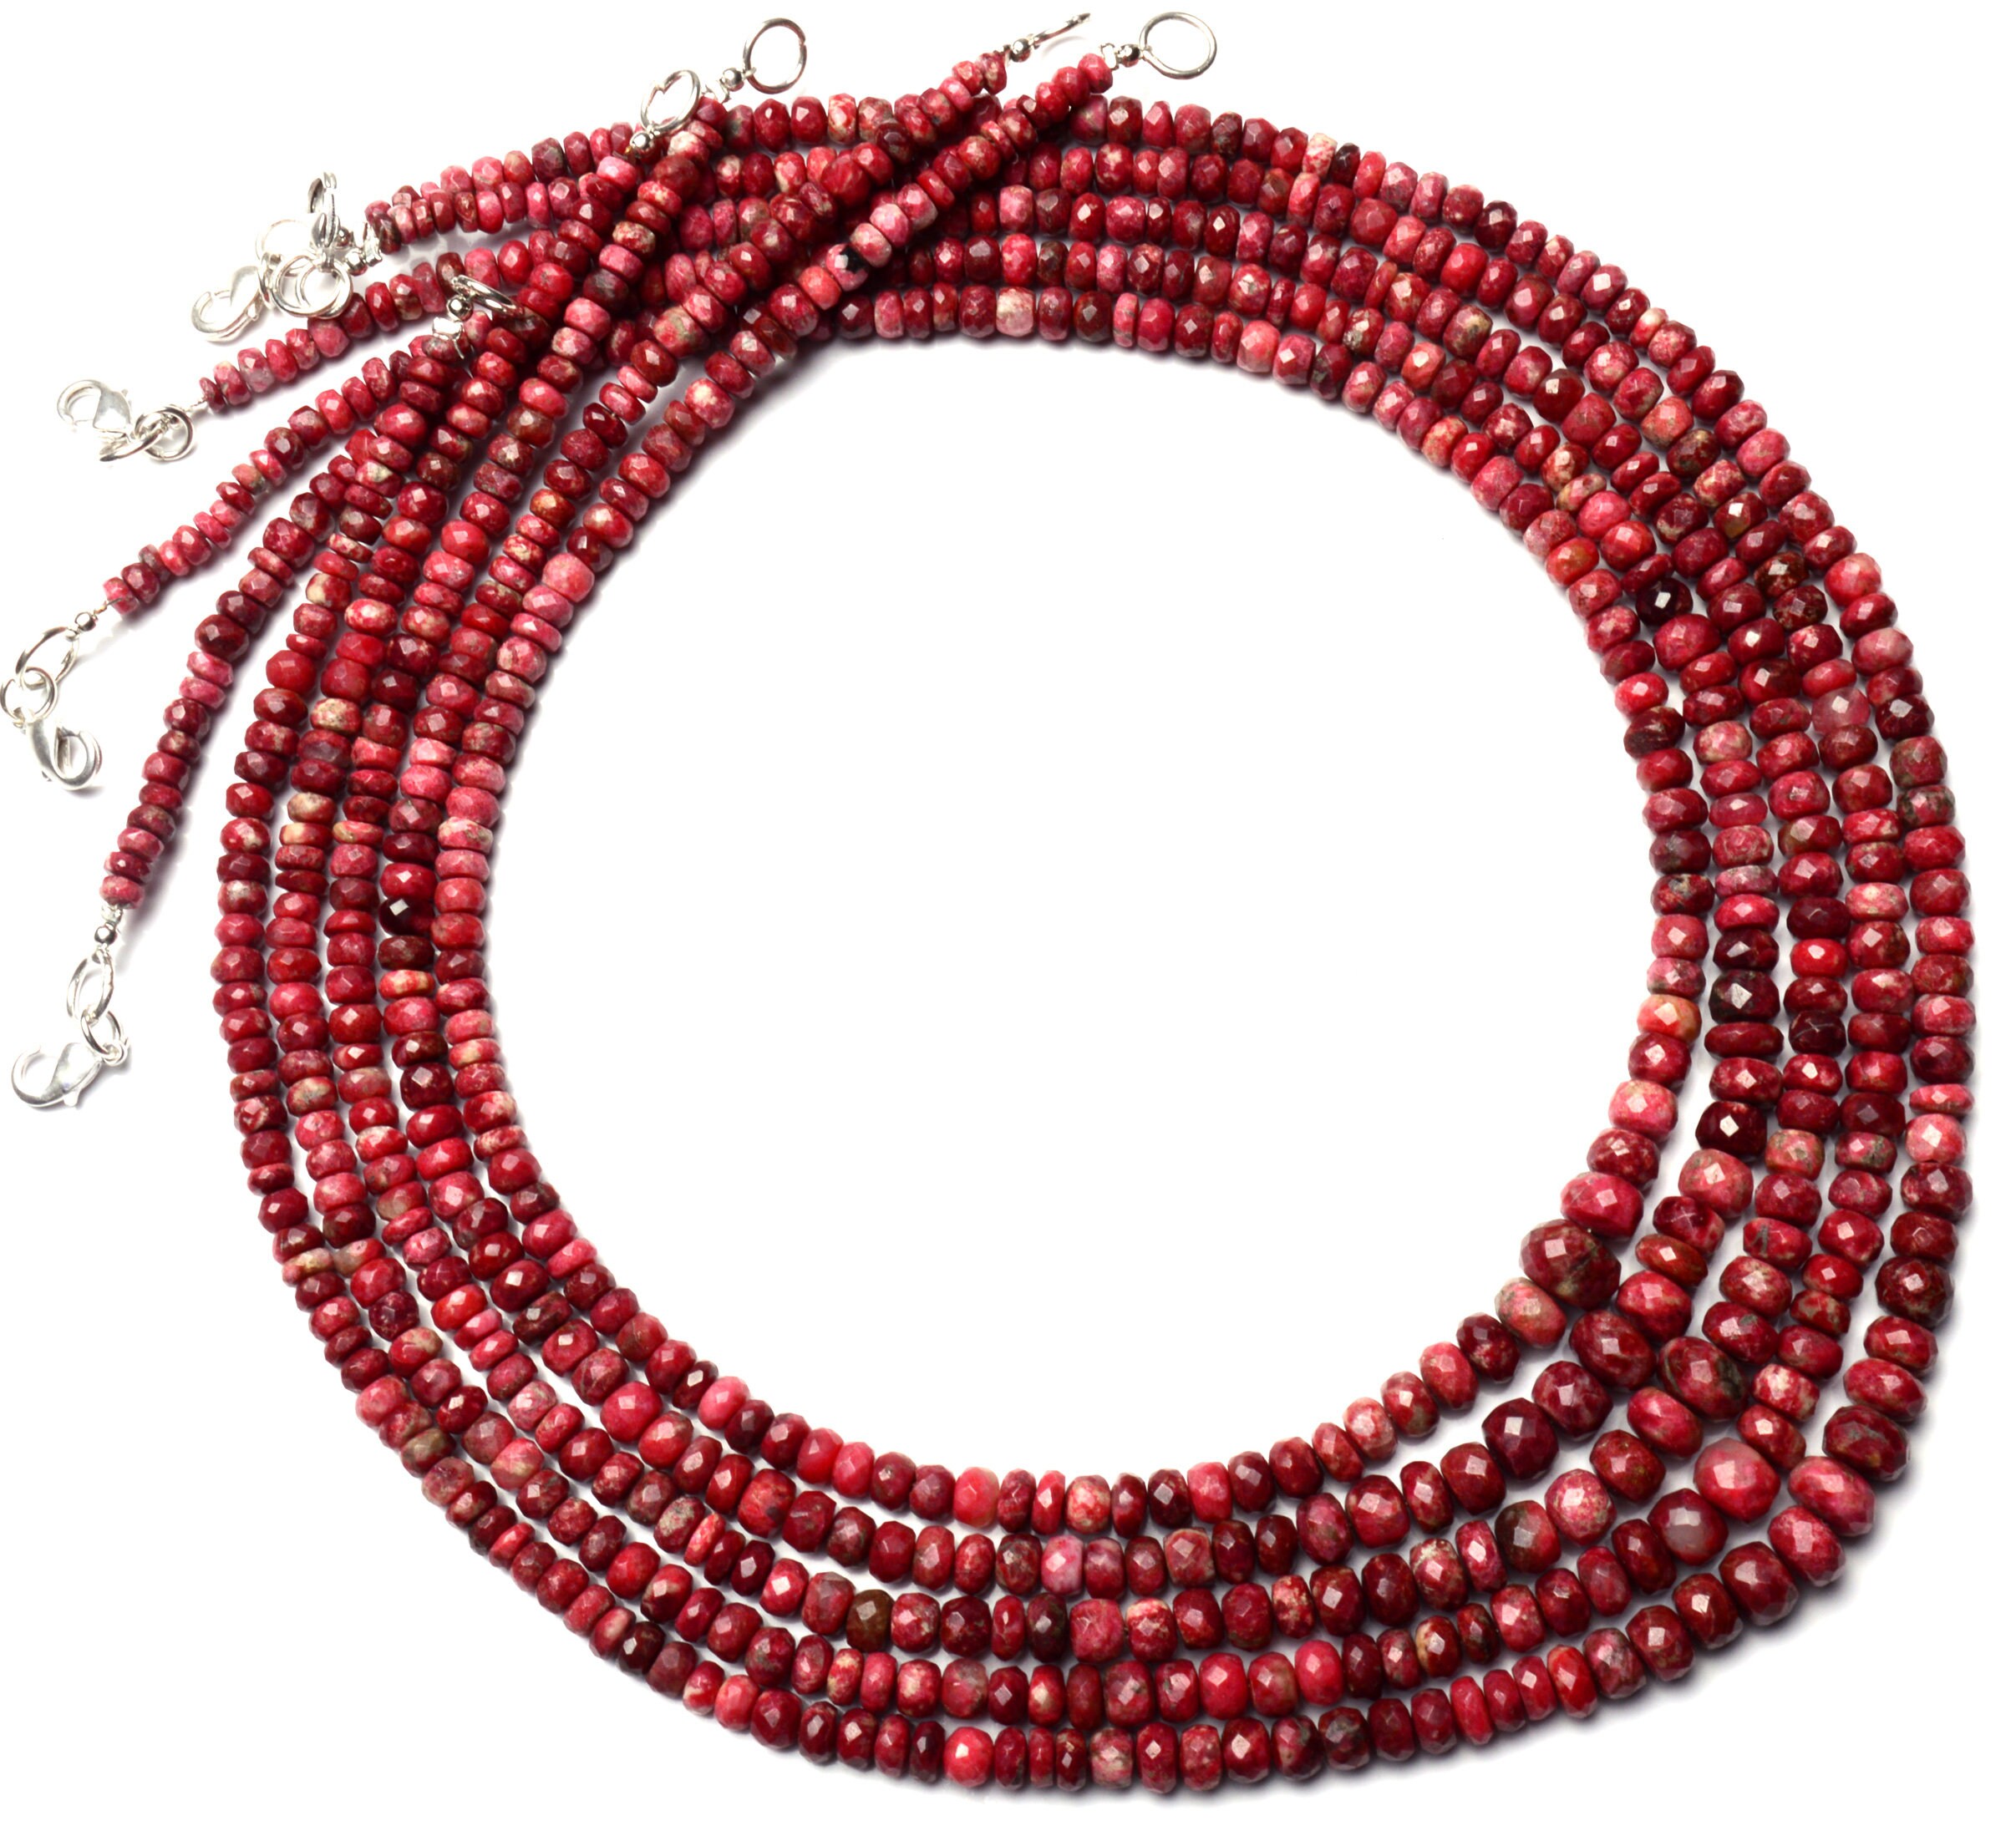 Natural Rare Gem Norway Thulite 4 to 6MM Size Smooth Rondelle Beads Necklace 18" 